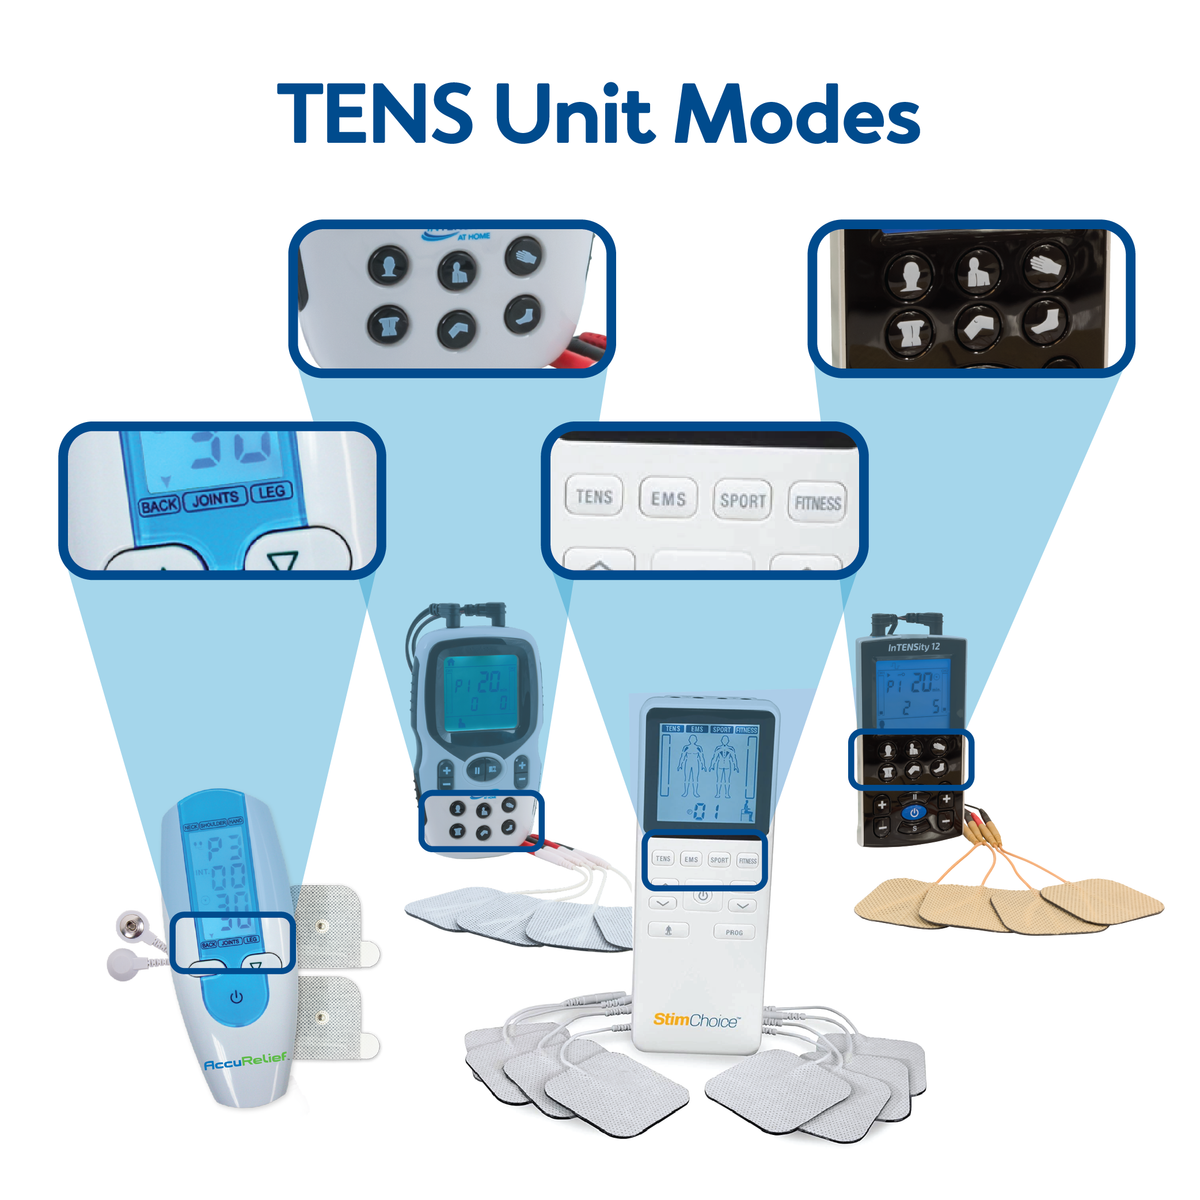 Various TENS units with their buttons highlighted. Text, TENS unit modes